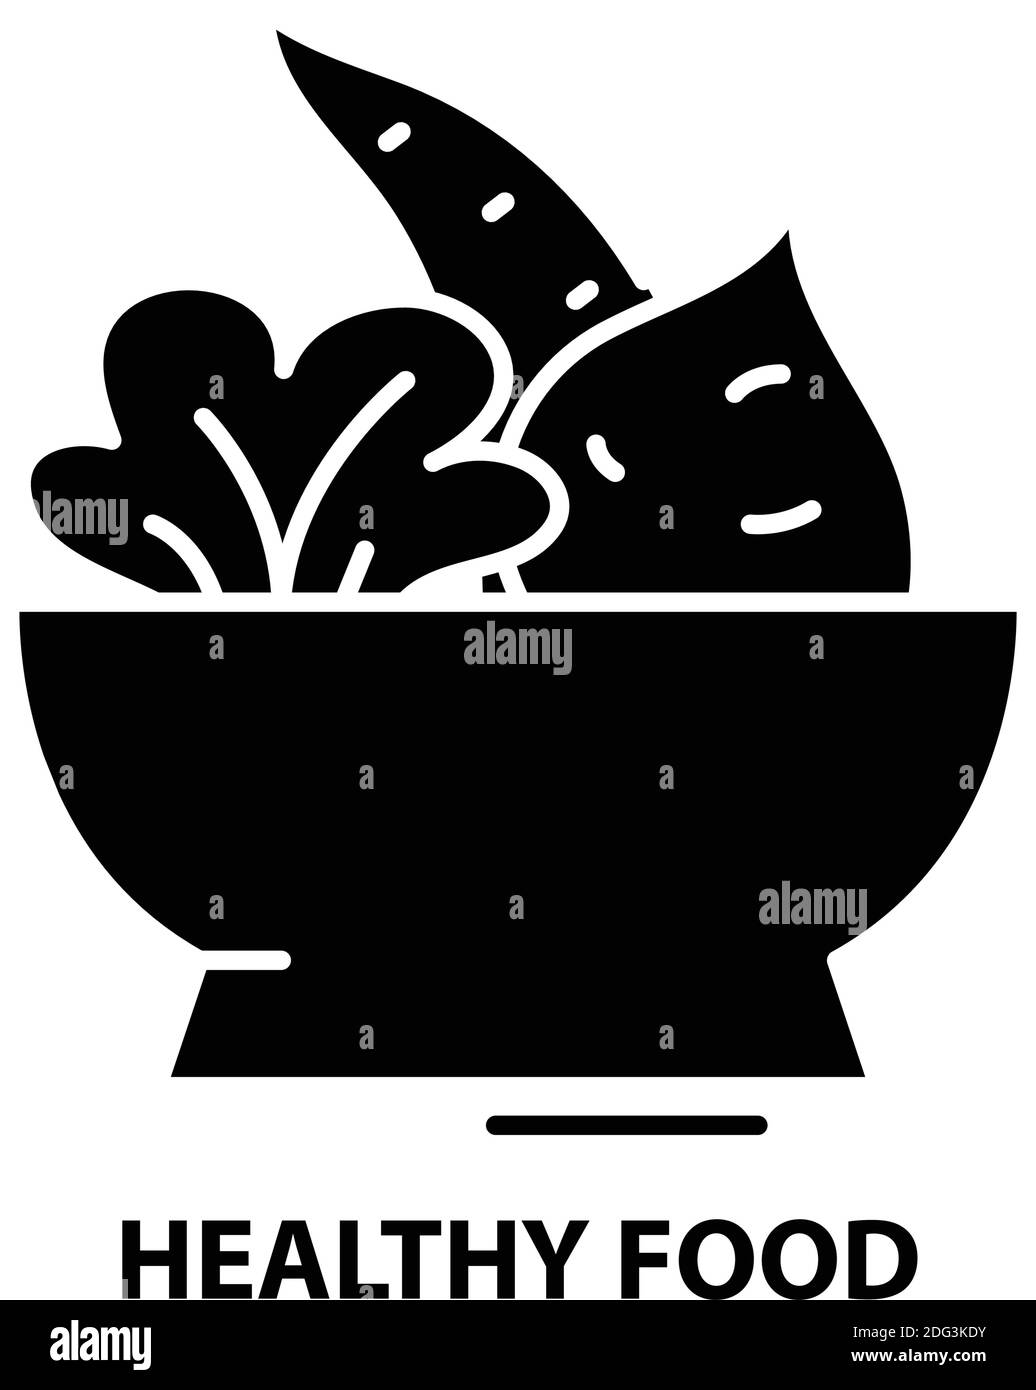 healthy food icon, black vector sign with editable strokes, concept illustration Stock Vector